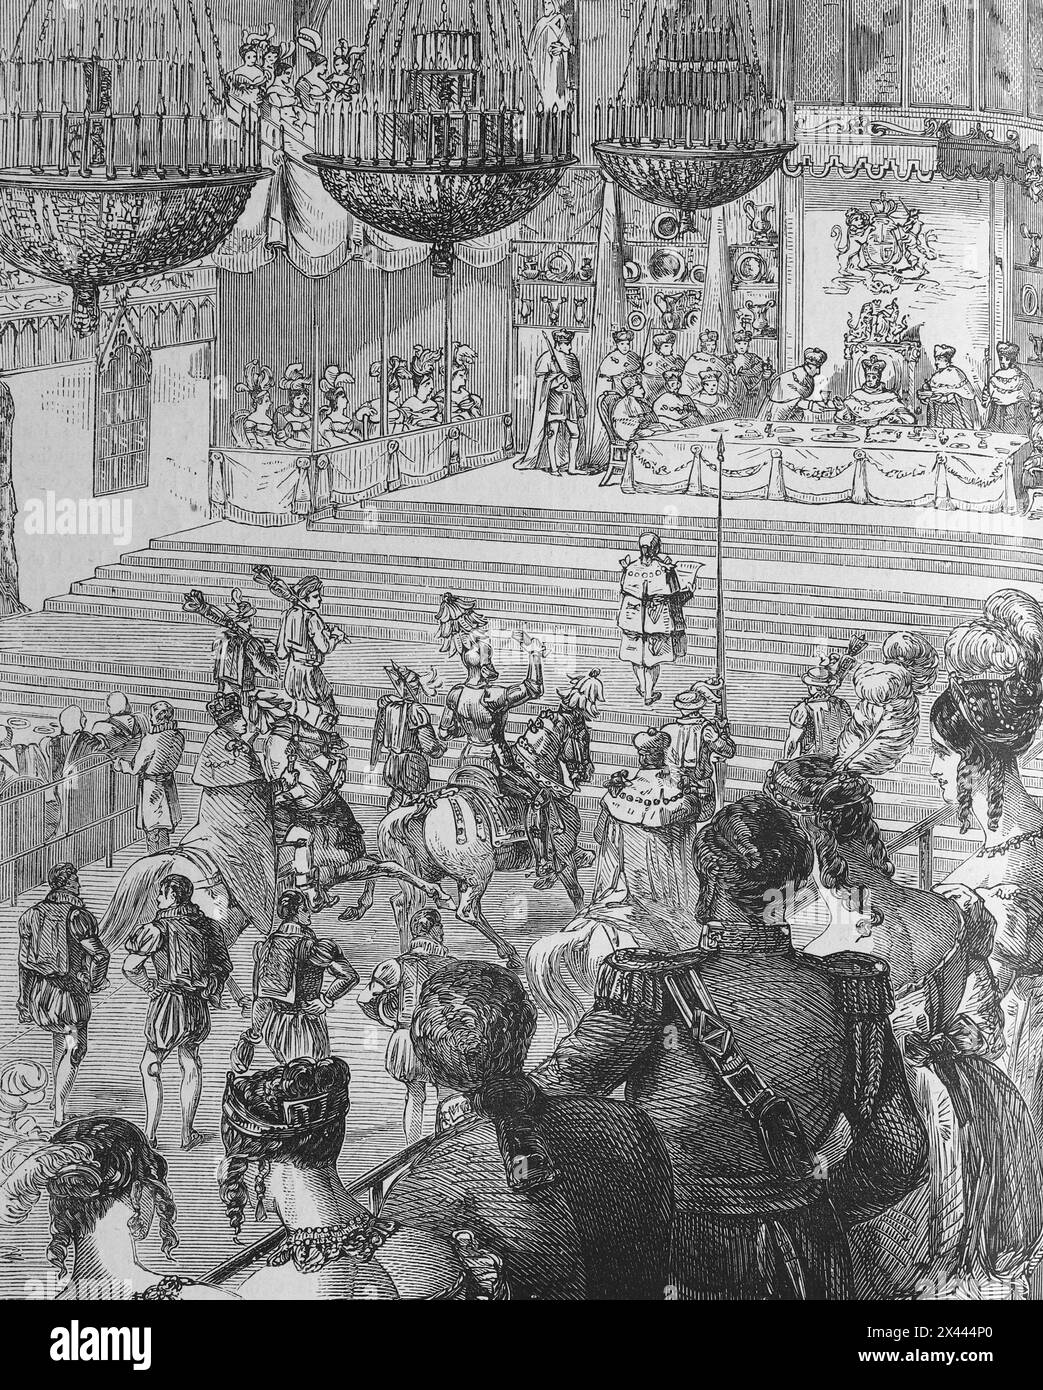 Banquet in Westminster Hall 19 July 1821 at the Coronation of King George IV of Great Britain and Ireland; The Champion's Challenge. Illustration from Cassell's History of England, Vol VII. New Edition published Circa 1873-5. Stock Photo